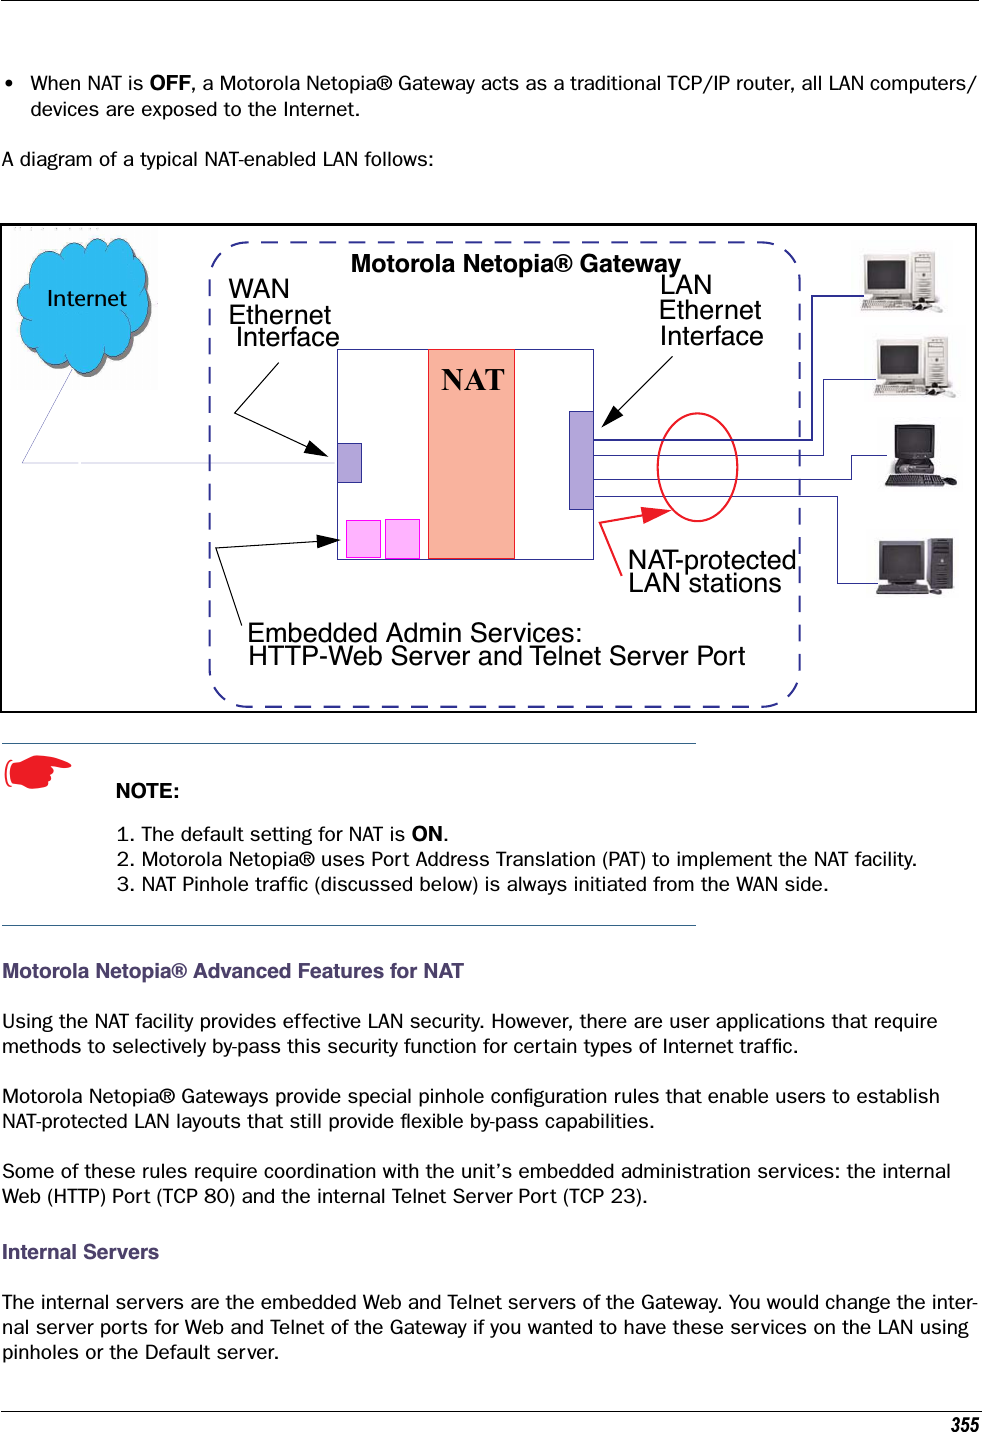 355•When NAT is OFF, a Motorola Netopia® Gateway acts as a traditional TCP/IP router, all LAN computers/devices are exposed to the Internet.A diagram of a typical NAT-enabled LAN follows: ☛  NOTE:1. The default setting for NAT is ON.2. Motorola Netopia® uses Port Address Translation (PAT) to implement the NAT facility.3. NAT Pinhole trafﬁc (discussed below) is always initiated from the WAN side.Motorola Netopia® Advanced Features for NATUsing the NAT facility provides effective LAN security. However, there are user applications that require methods to selectively by-pass this security function for certain types of Internet trafﬁc.Motorola Netopia® Gateways provide special pinhole conﬁguration rules that enable users to establish NAT-protected LAN layouts that still provide ﬂexible by-pass capabilities.Some of these rules require coordination with the unit’s embedded administration services: the internal Web (HTTP) Port (TCP 80) and the internal Telnet Server Port (TCP 23). Internal ServersThe internal servers are the embedded Web and Telnet servers of the Gateway. You would change the inter-nal server ports for Web and Telnet of the Gateway if you wanted to have these services on the LAN using pinholes or the Default server.WAN InterfaceLANEthernet InterfaceMotorola Netopia® GatewayNATInternetEmbedded Admin Services:HTTP-Web Server and Telnet Server PortNAT-protectedLAN stationsEthernet